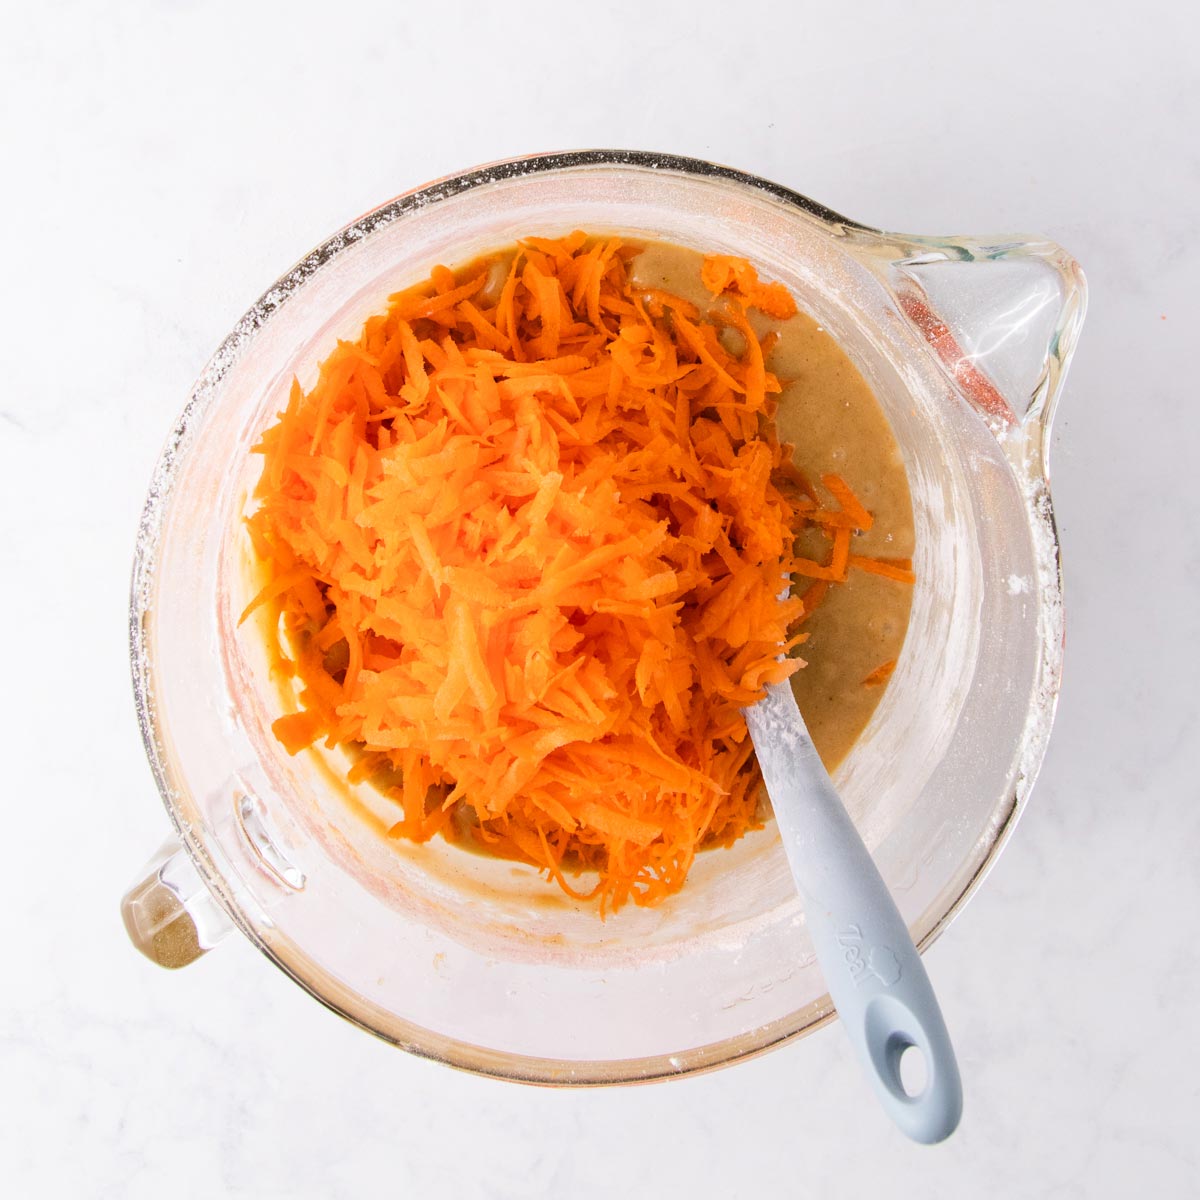 The shredded carrots being mixed into the cupcake batter.